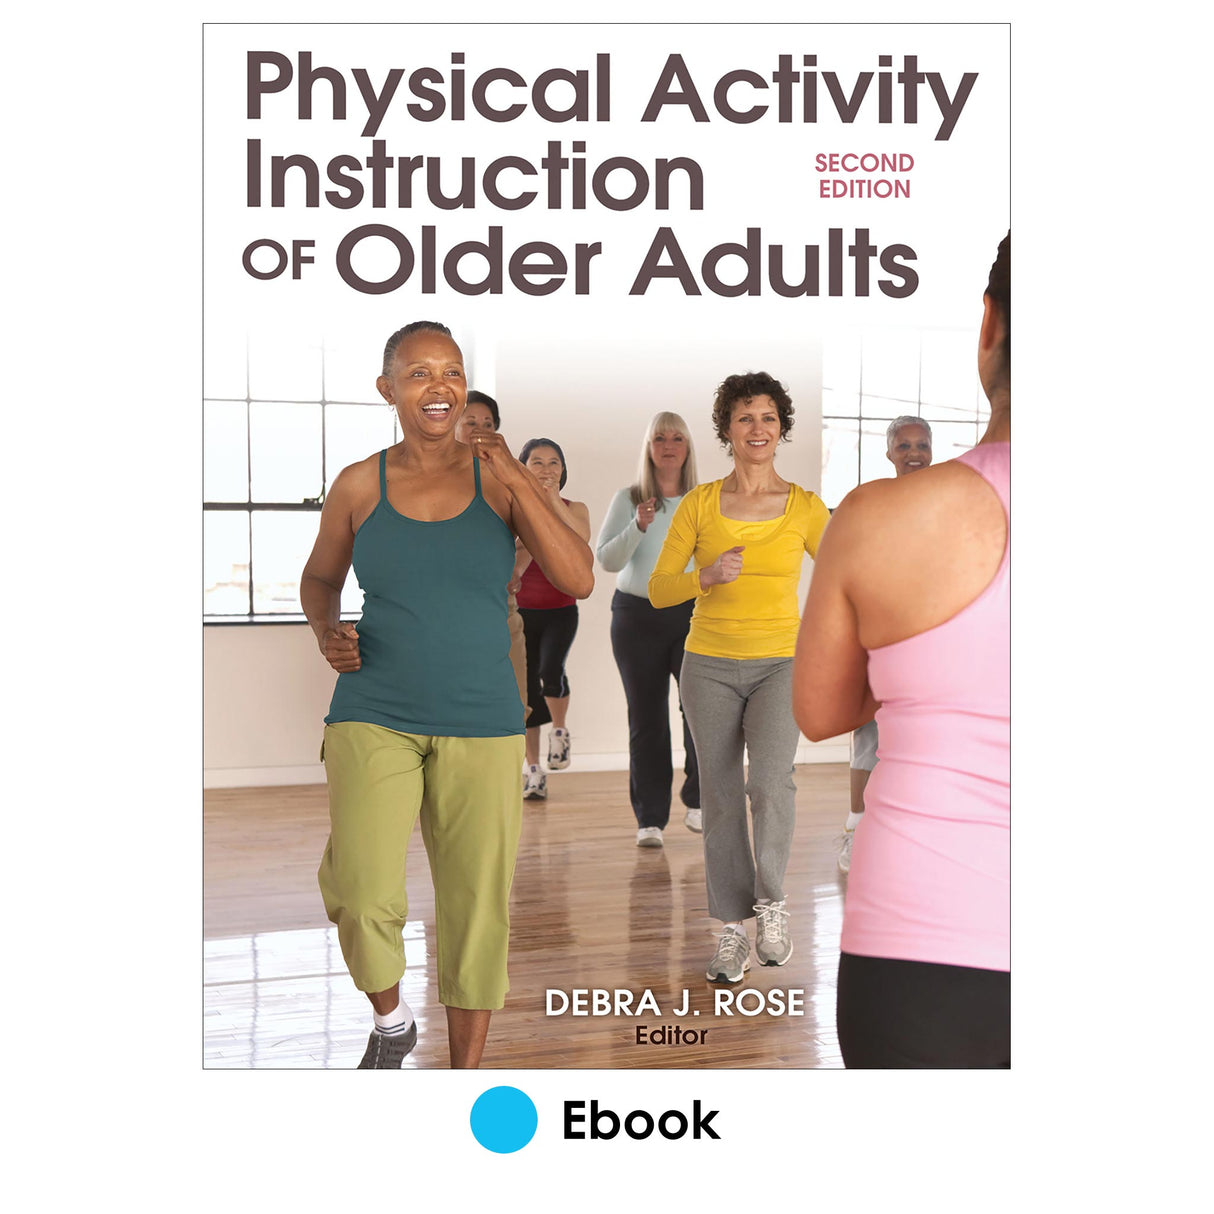 Physical Activity Instruction of Older Adults 2nd Edition epub